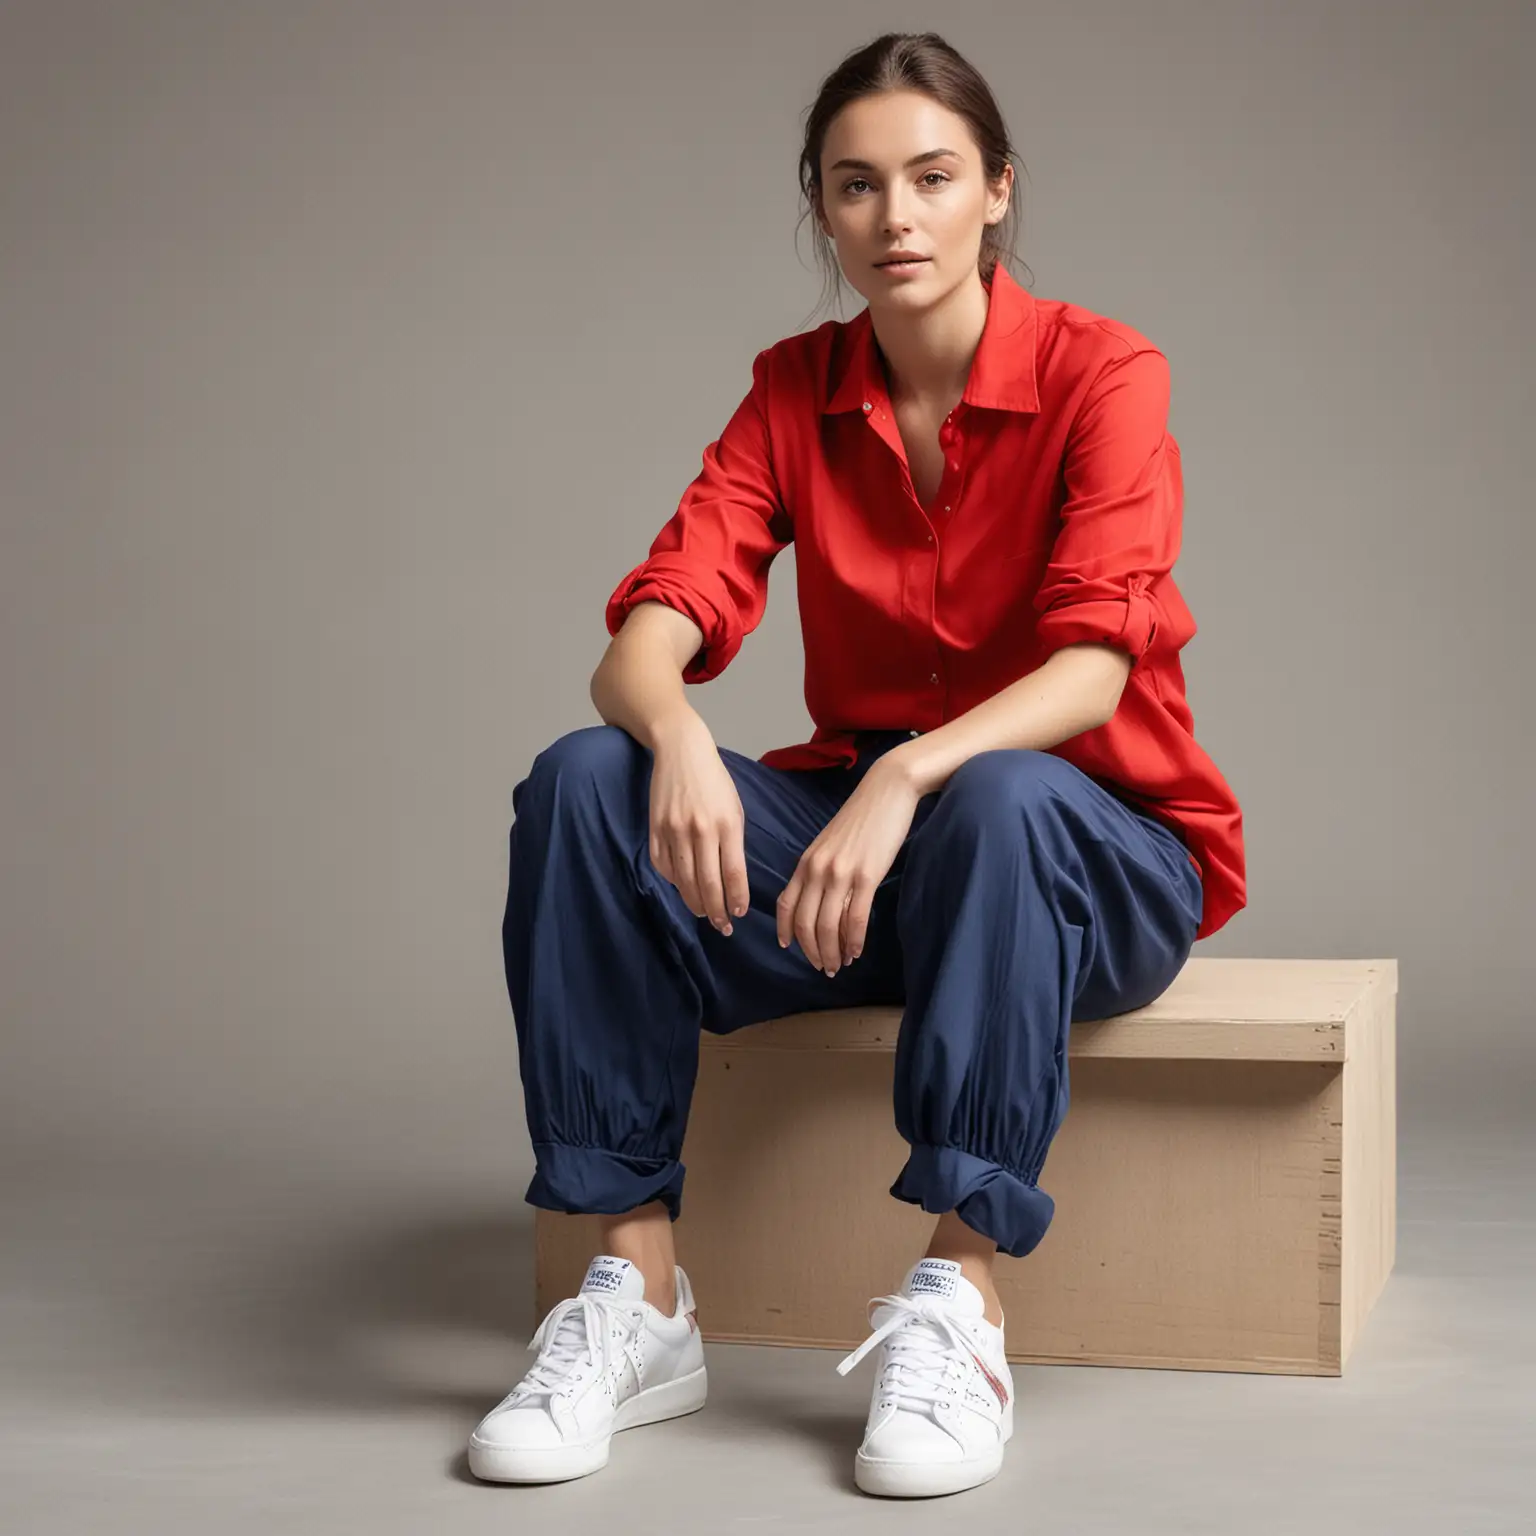 Casual Woman Sitting in Blue Shirt and Red Pants